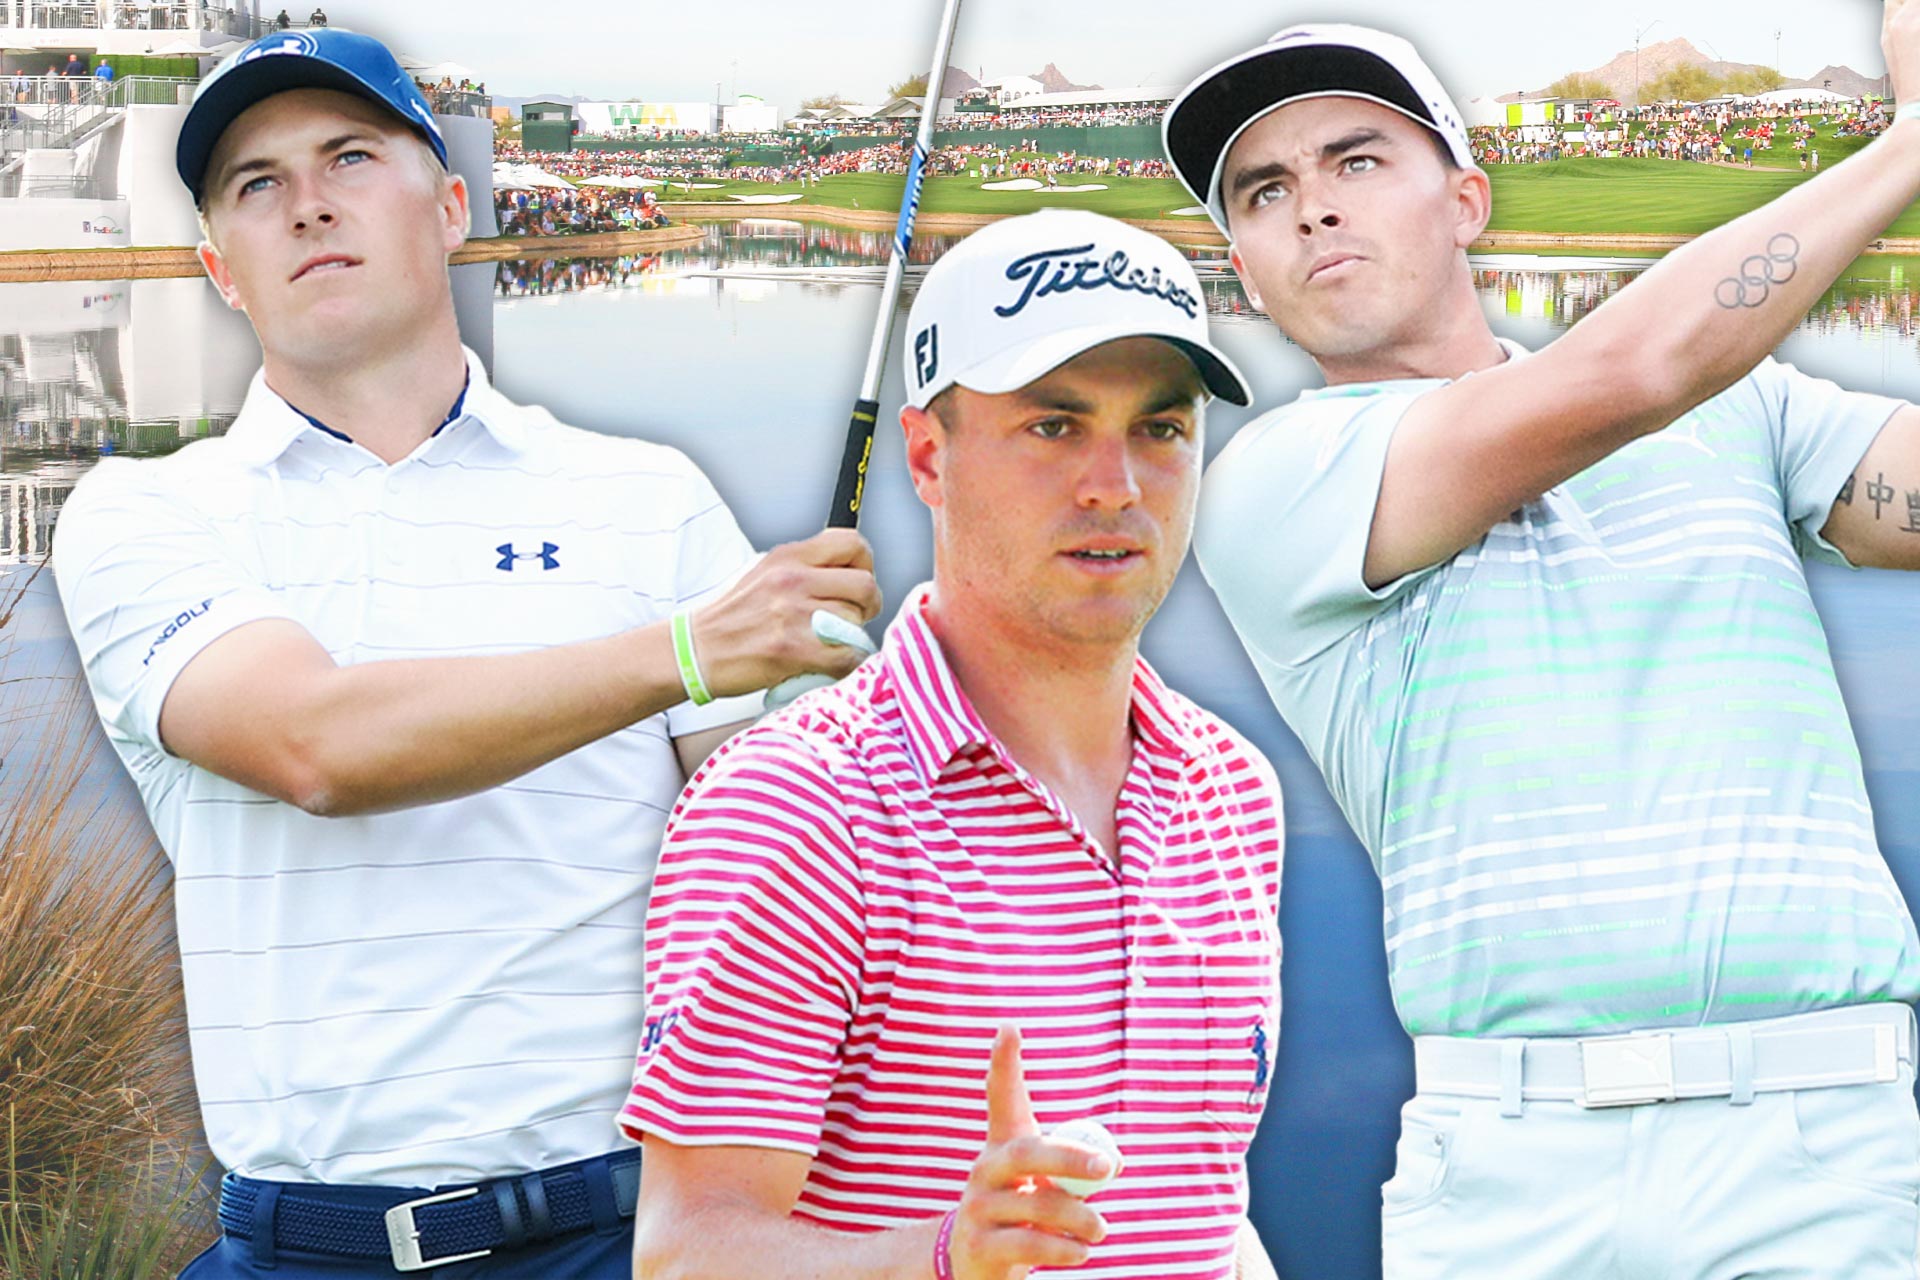 Rickie Fowler, Jordan Spieth and Justin Thomas Among First Commitments